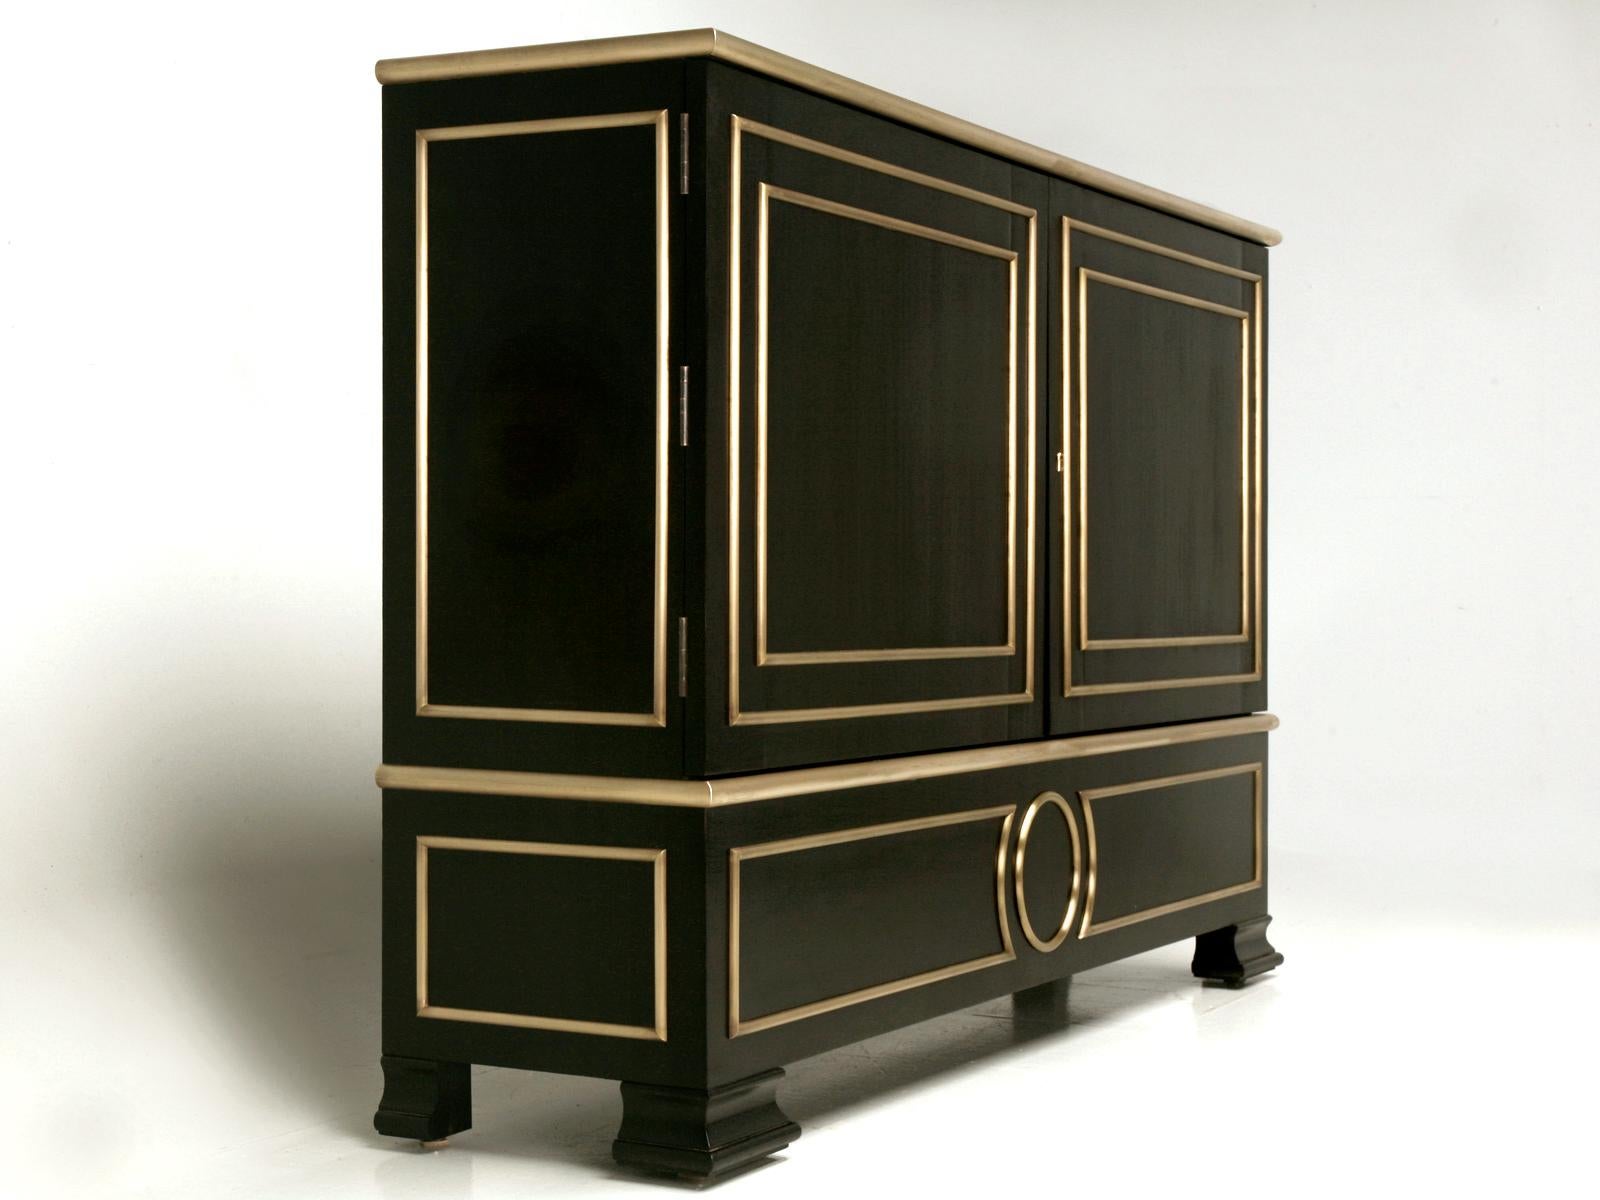 Our ebonized mahogany Directoire style buffet with solid bronze trim was custom made in the Old Plank Workshop. The buffet is handcrafted and built from solid mahogany, then triple-sanded smooth and coated with an old-fashioned hand-rubbed ebonized